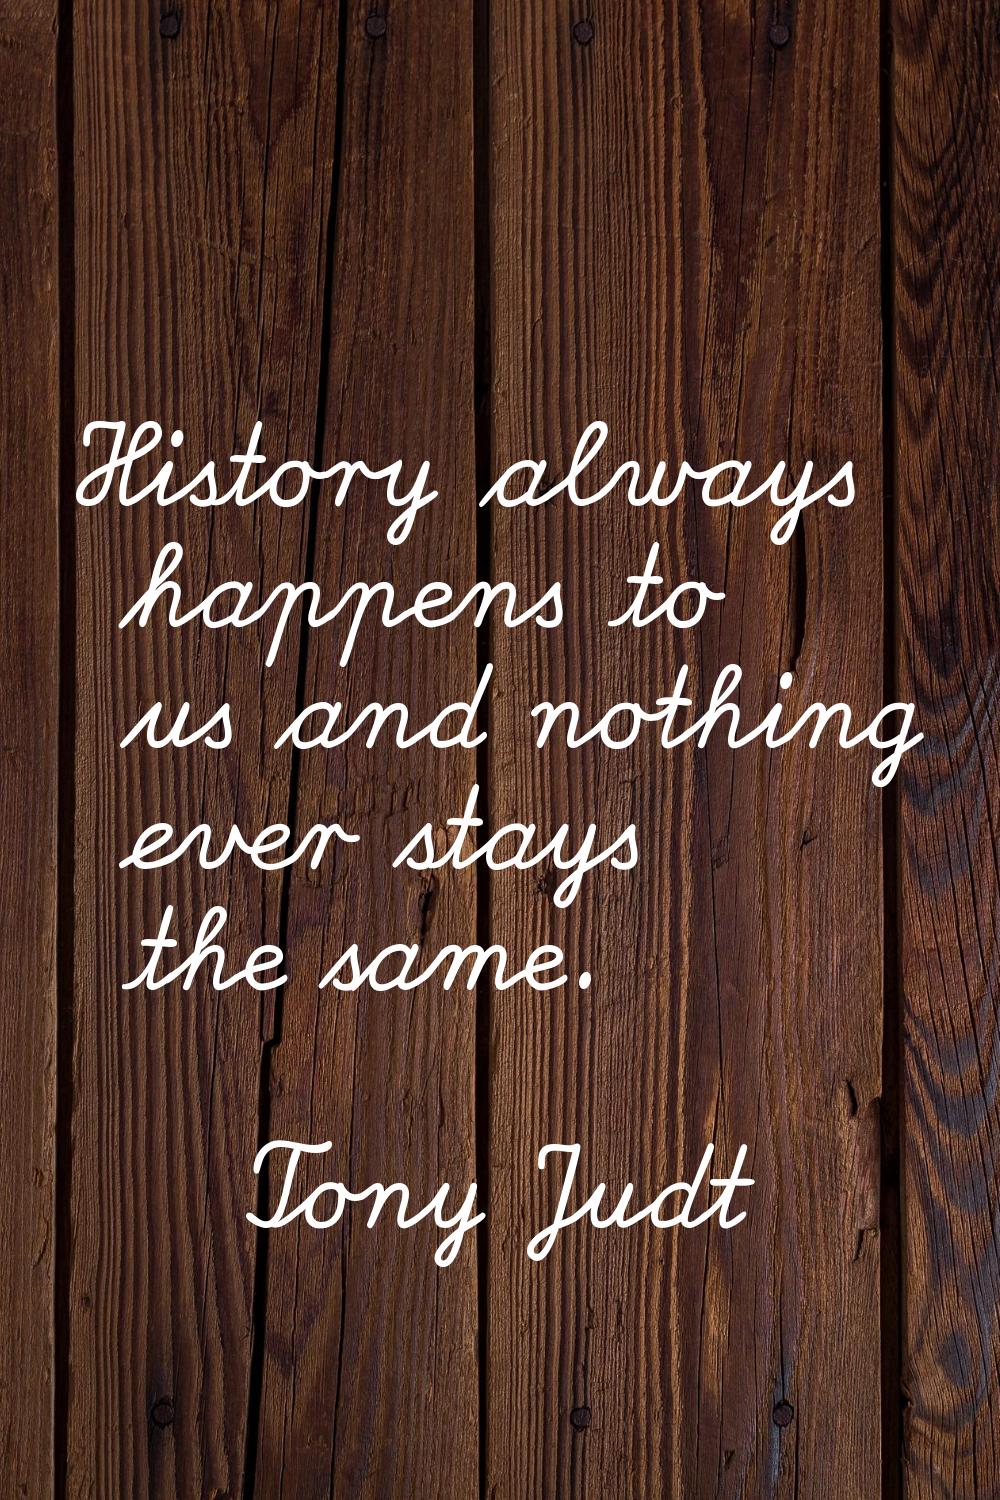 History always happens to us and nothing ever stays the same.